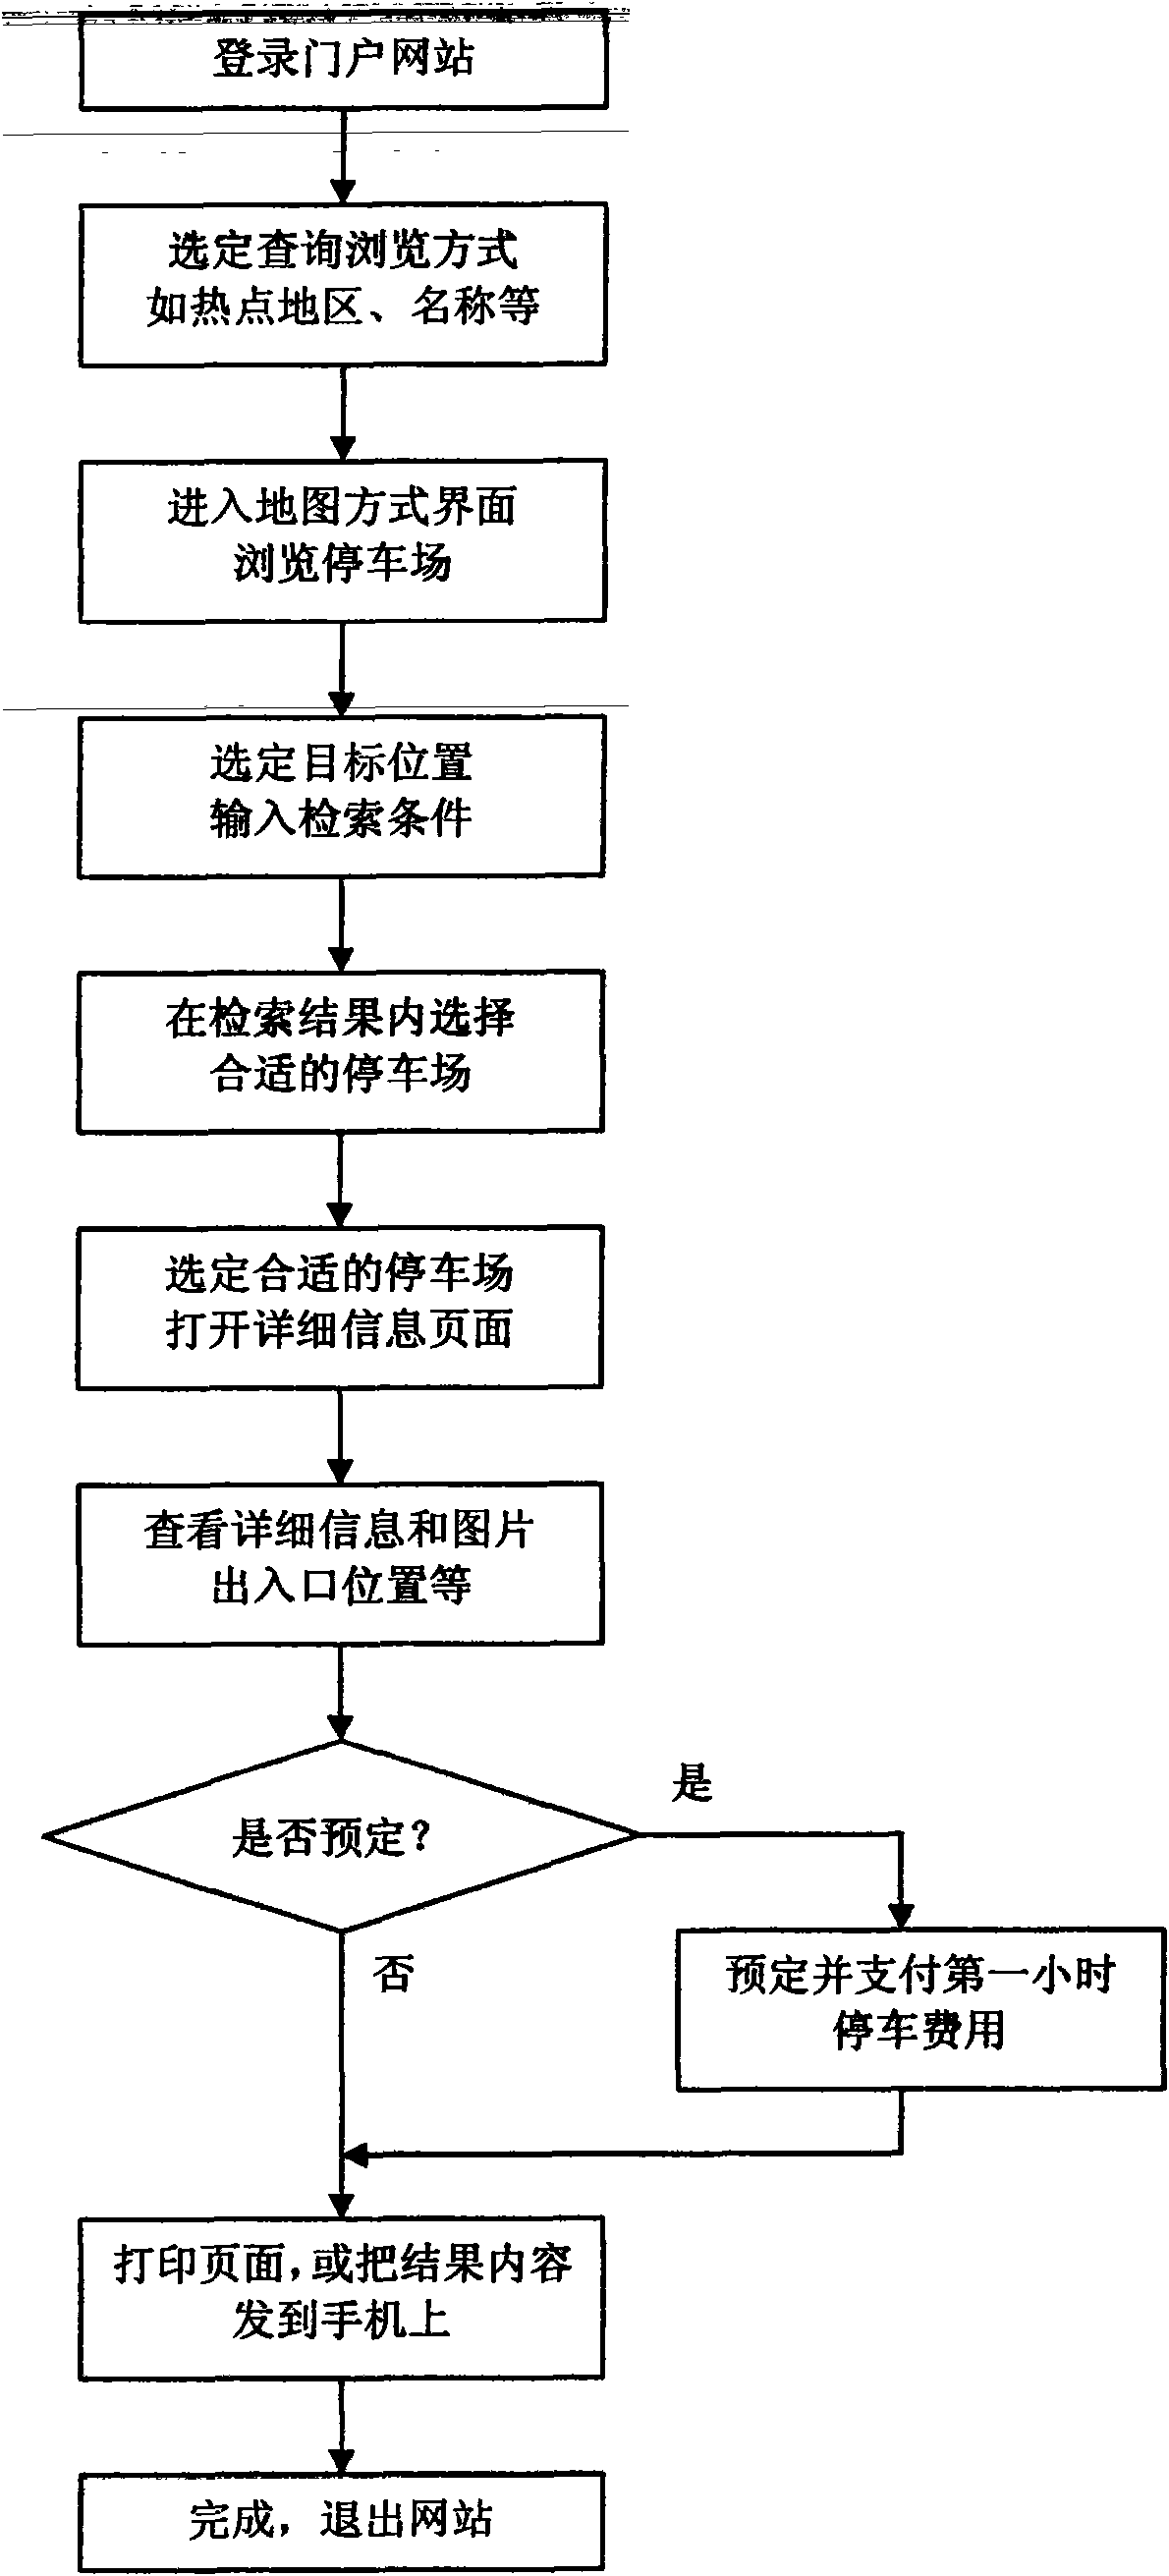 Intelligent parking induction system and method